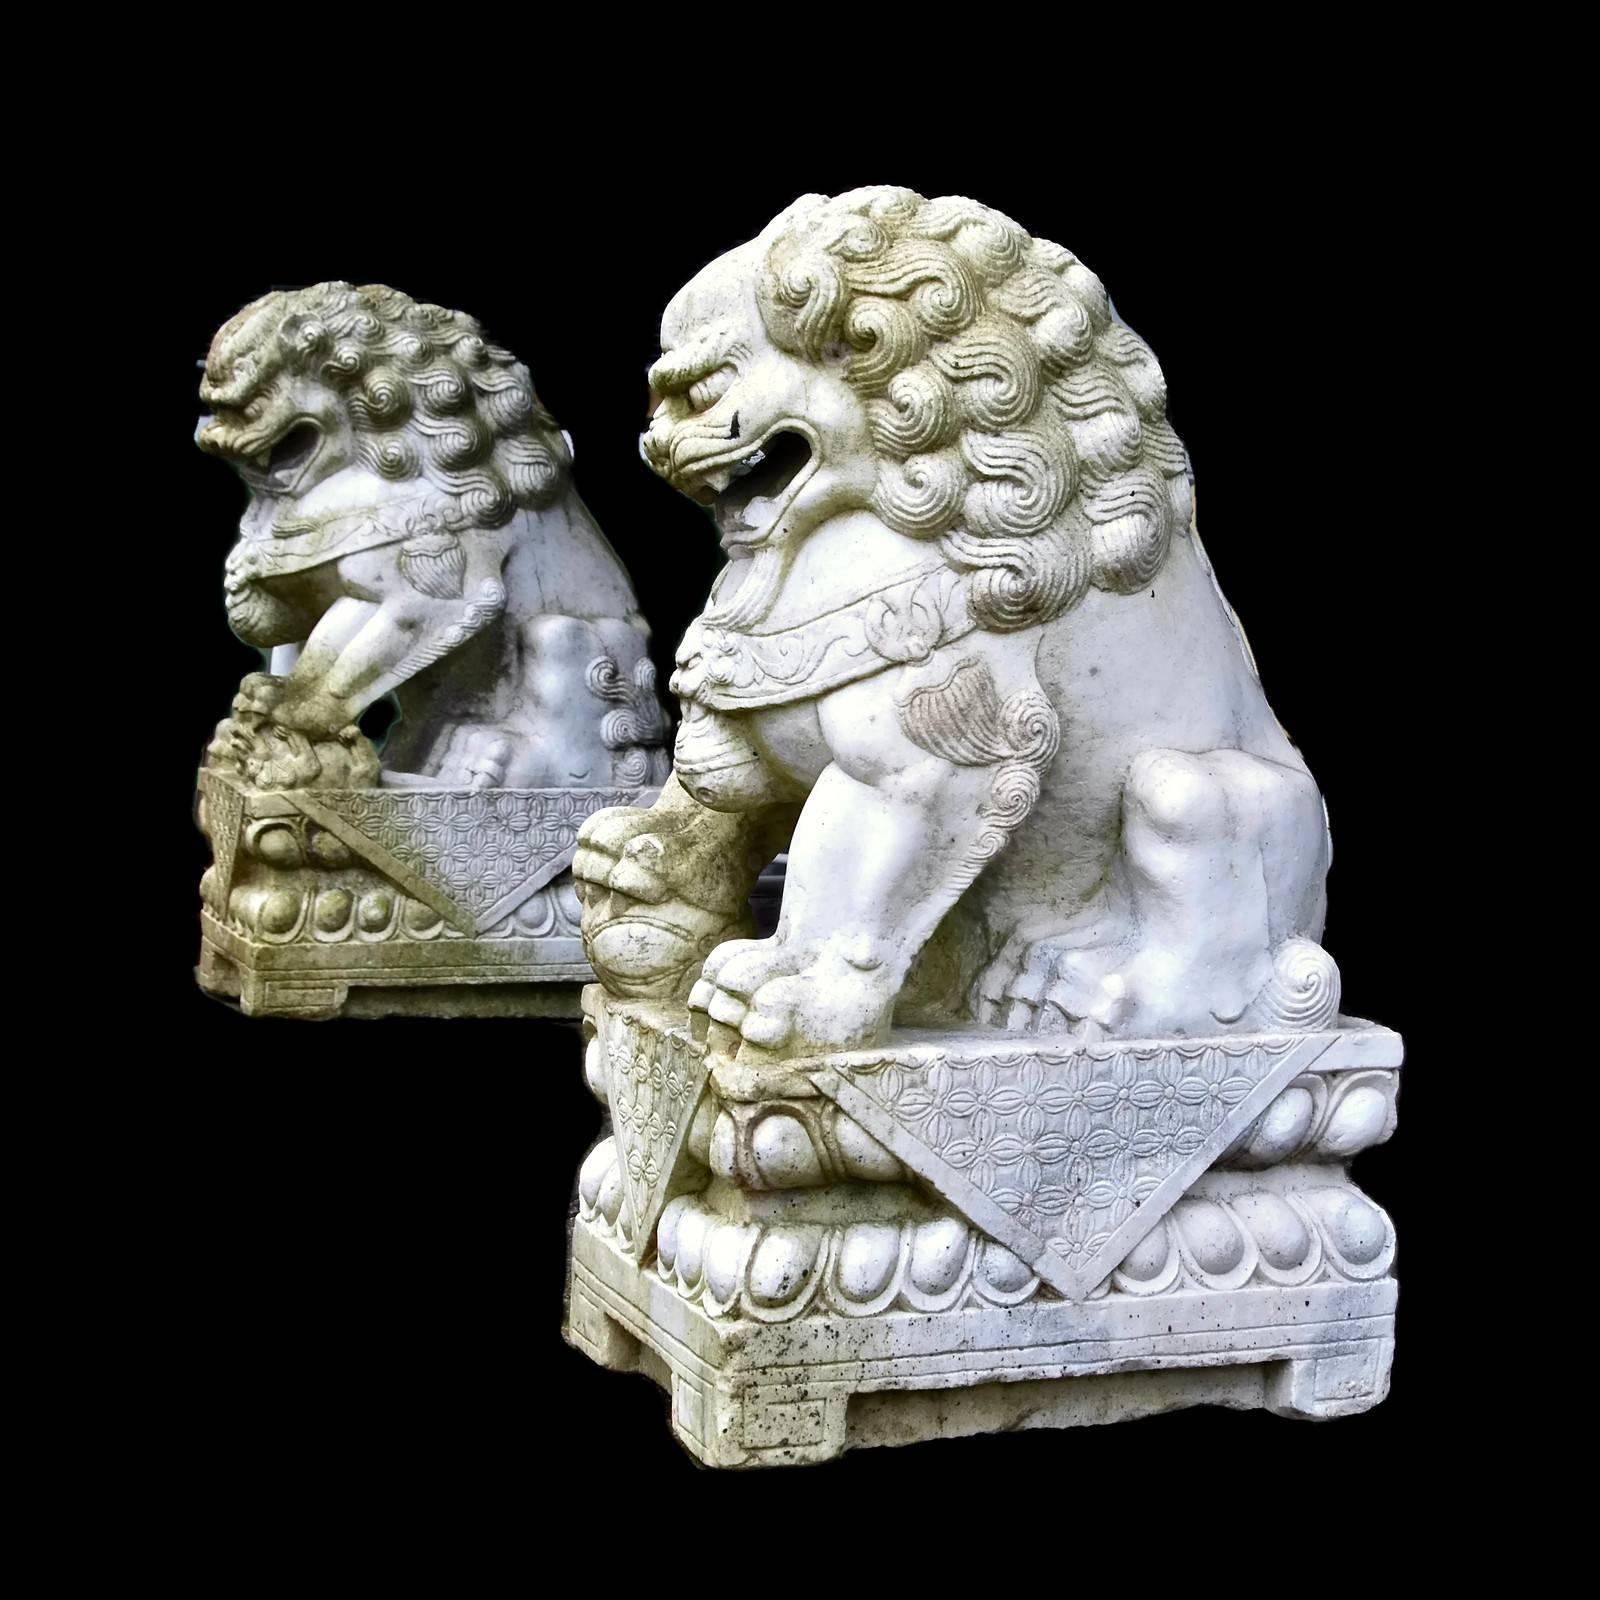 This substantial pair of antique Chinese foo lions are hand-carved from white marble and have a traditional form. Understood to have protective qualities, foo lions are typically seen at the entrance of Chinese temples and Imperial buildings as well